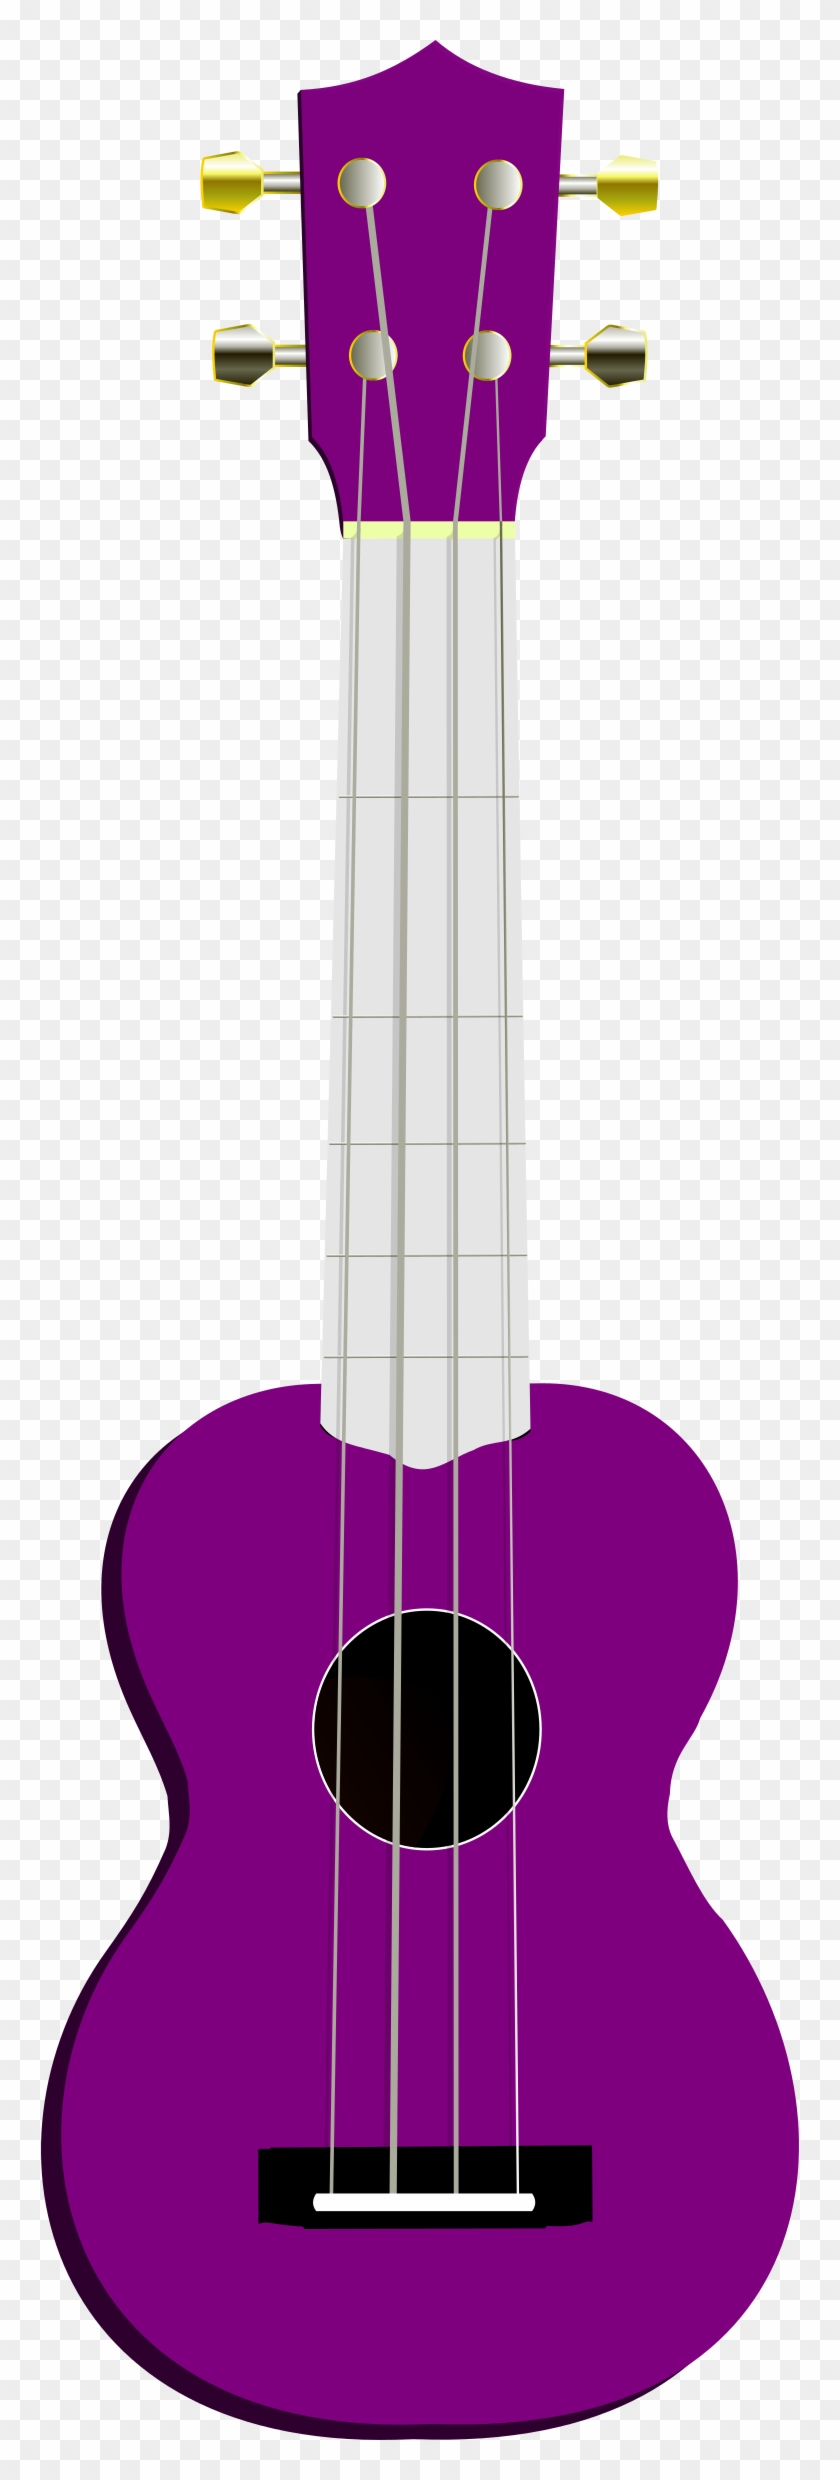 This Free Icons Png Design Of Ukulele Remix Clipart #680545